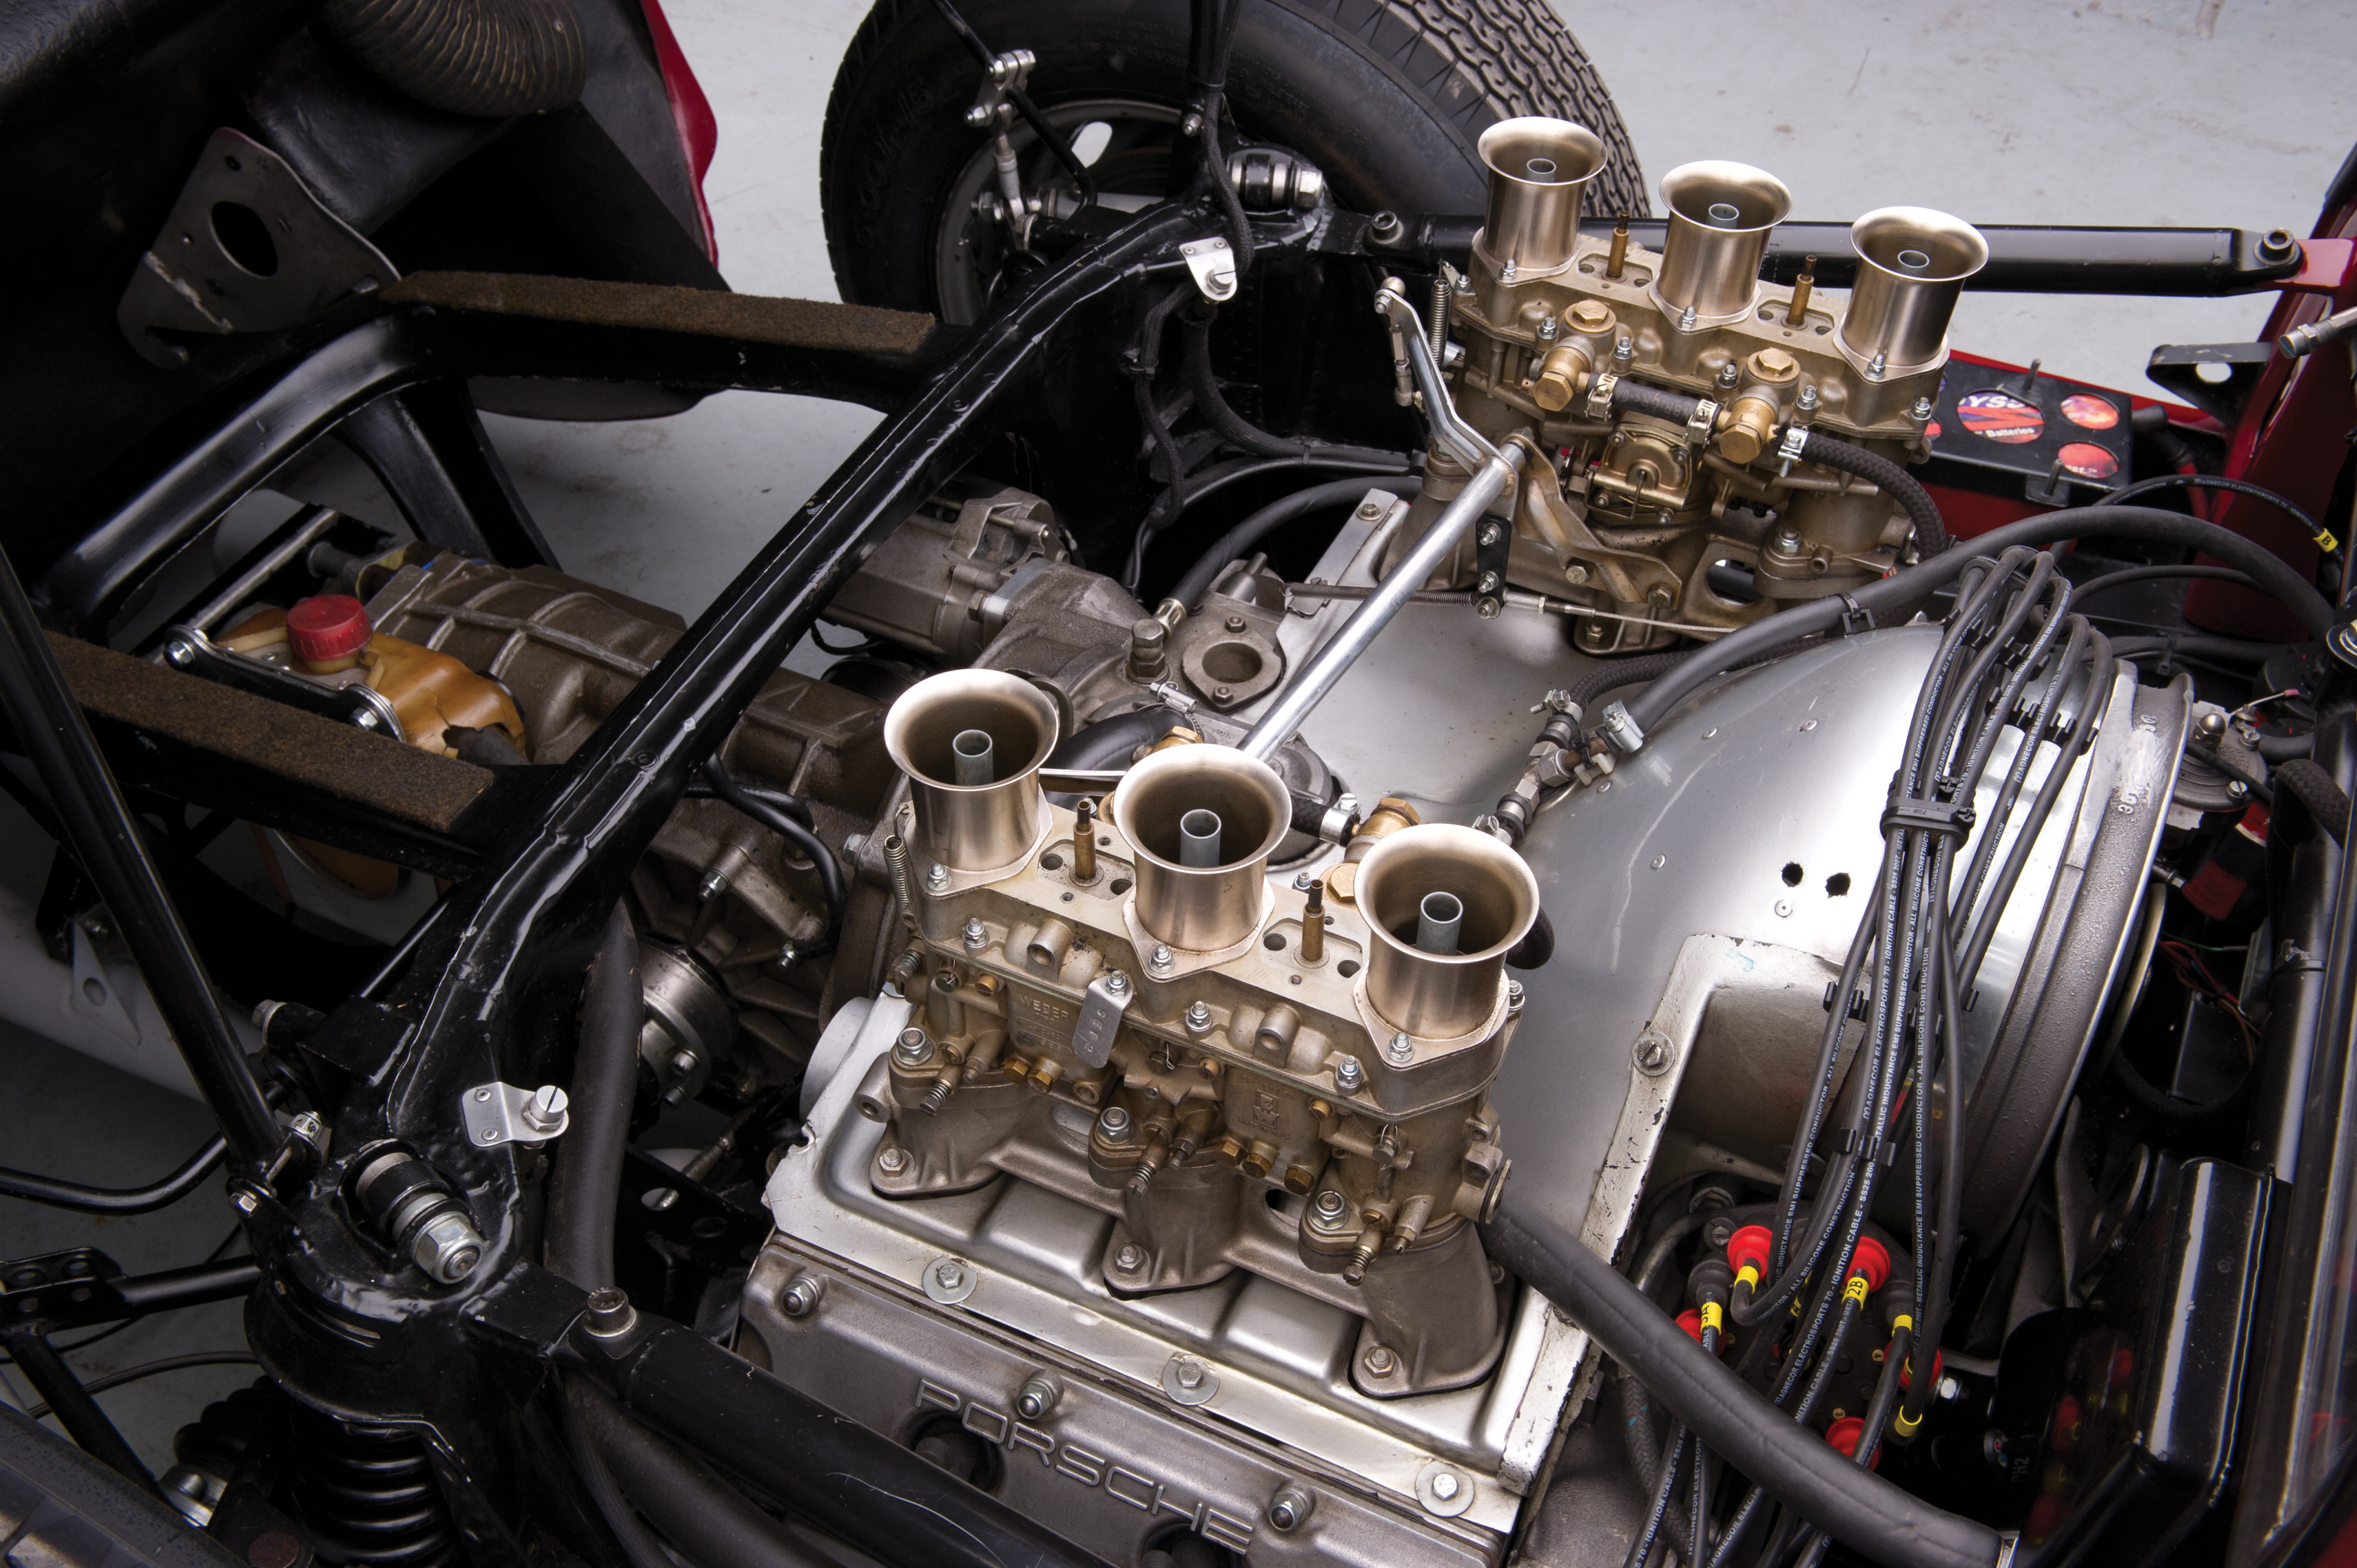 A typical 904 engine